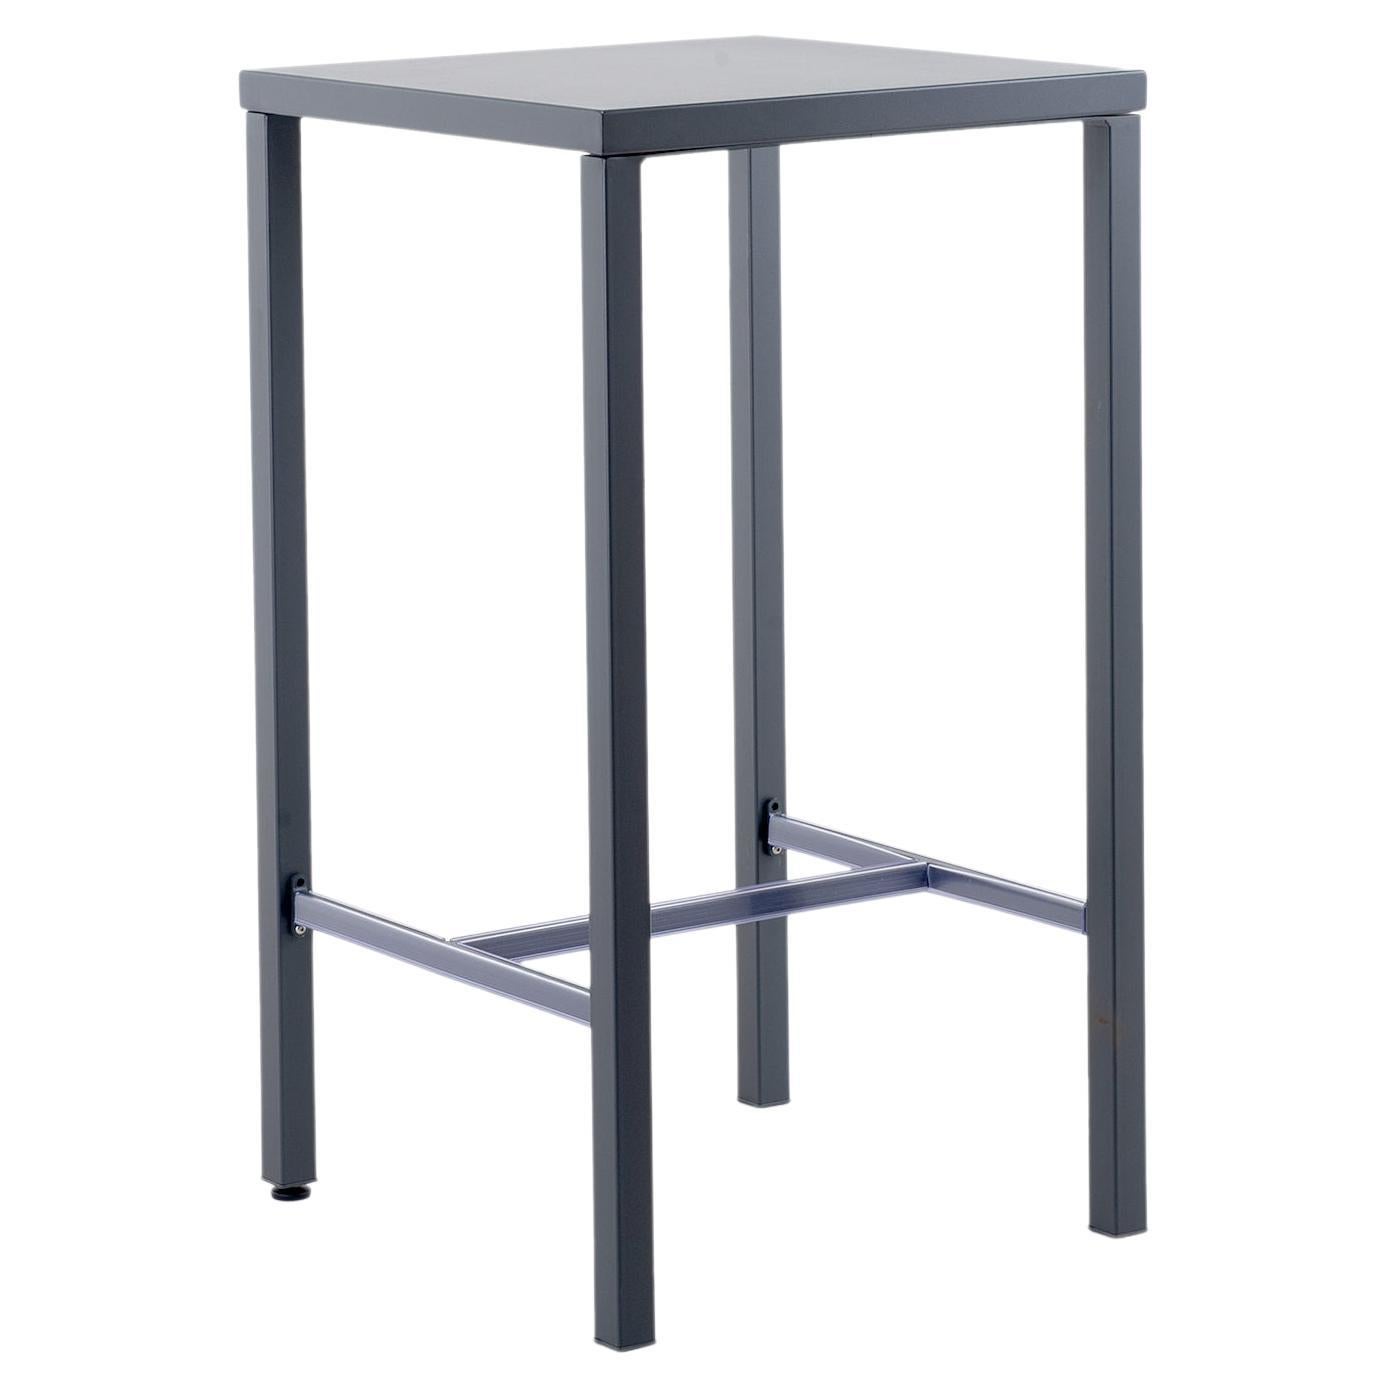 Unopiu' Conrad Tall Table Outdoor Collection For Sale